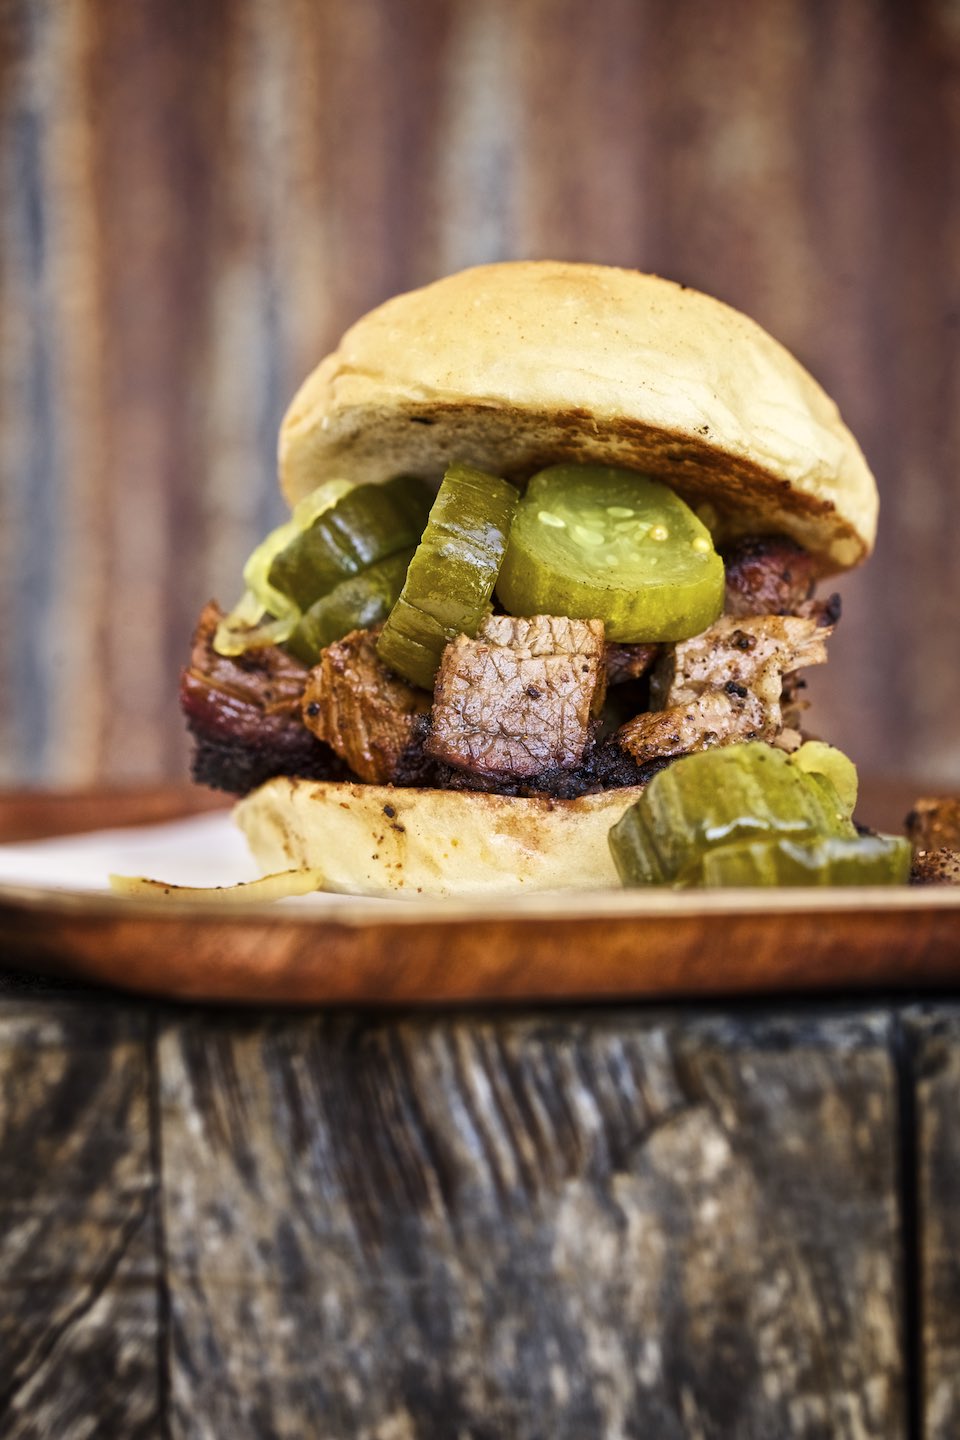 Jody Horton Photography - Barbecue brisket sandwich with bread and butter pickles.